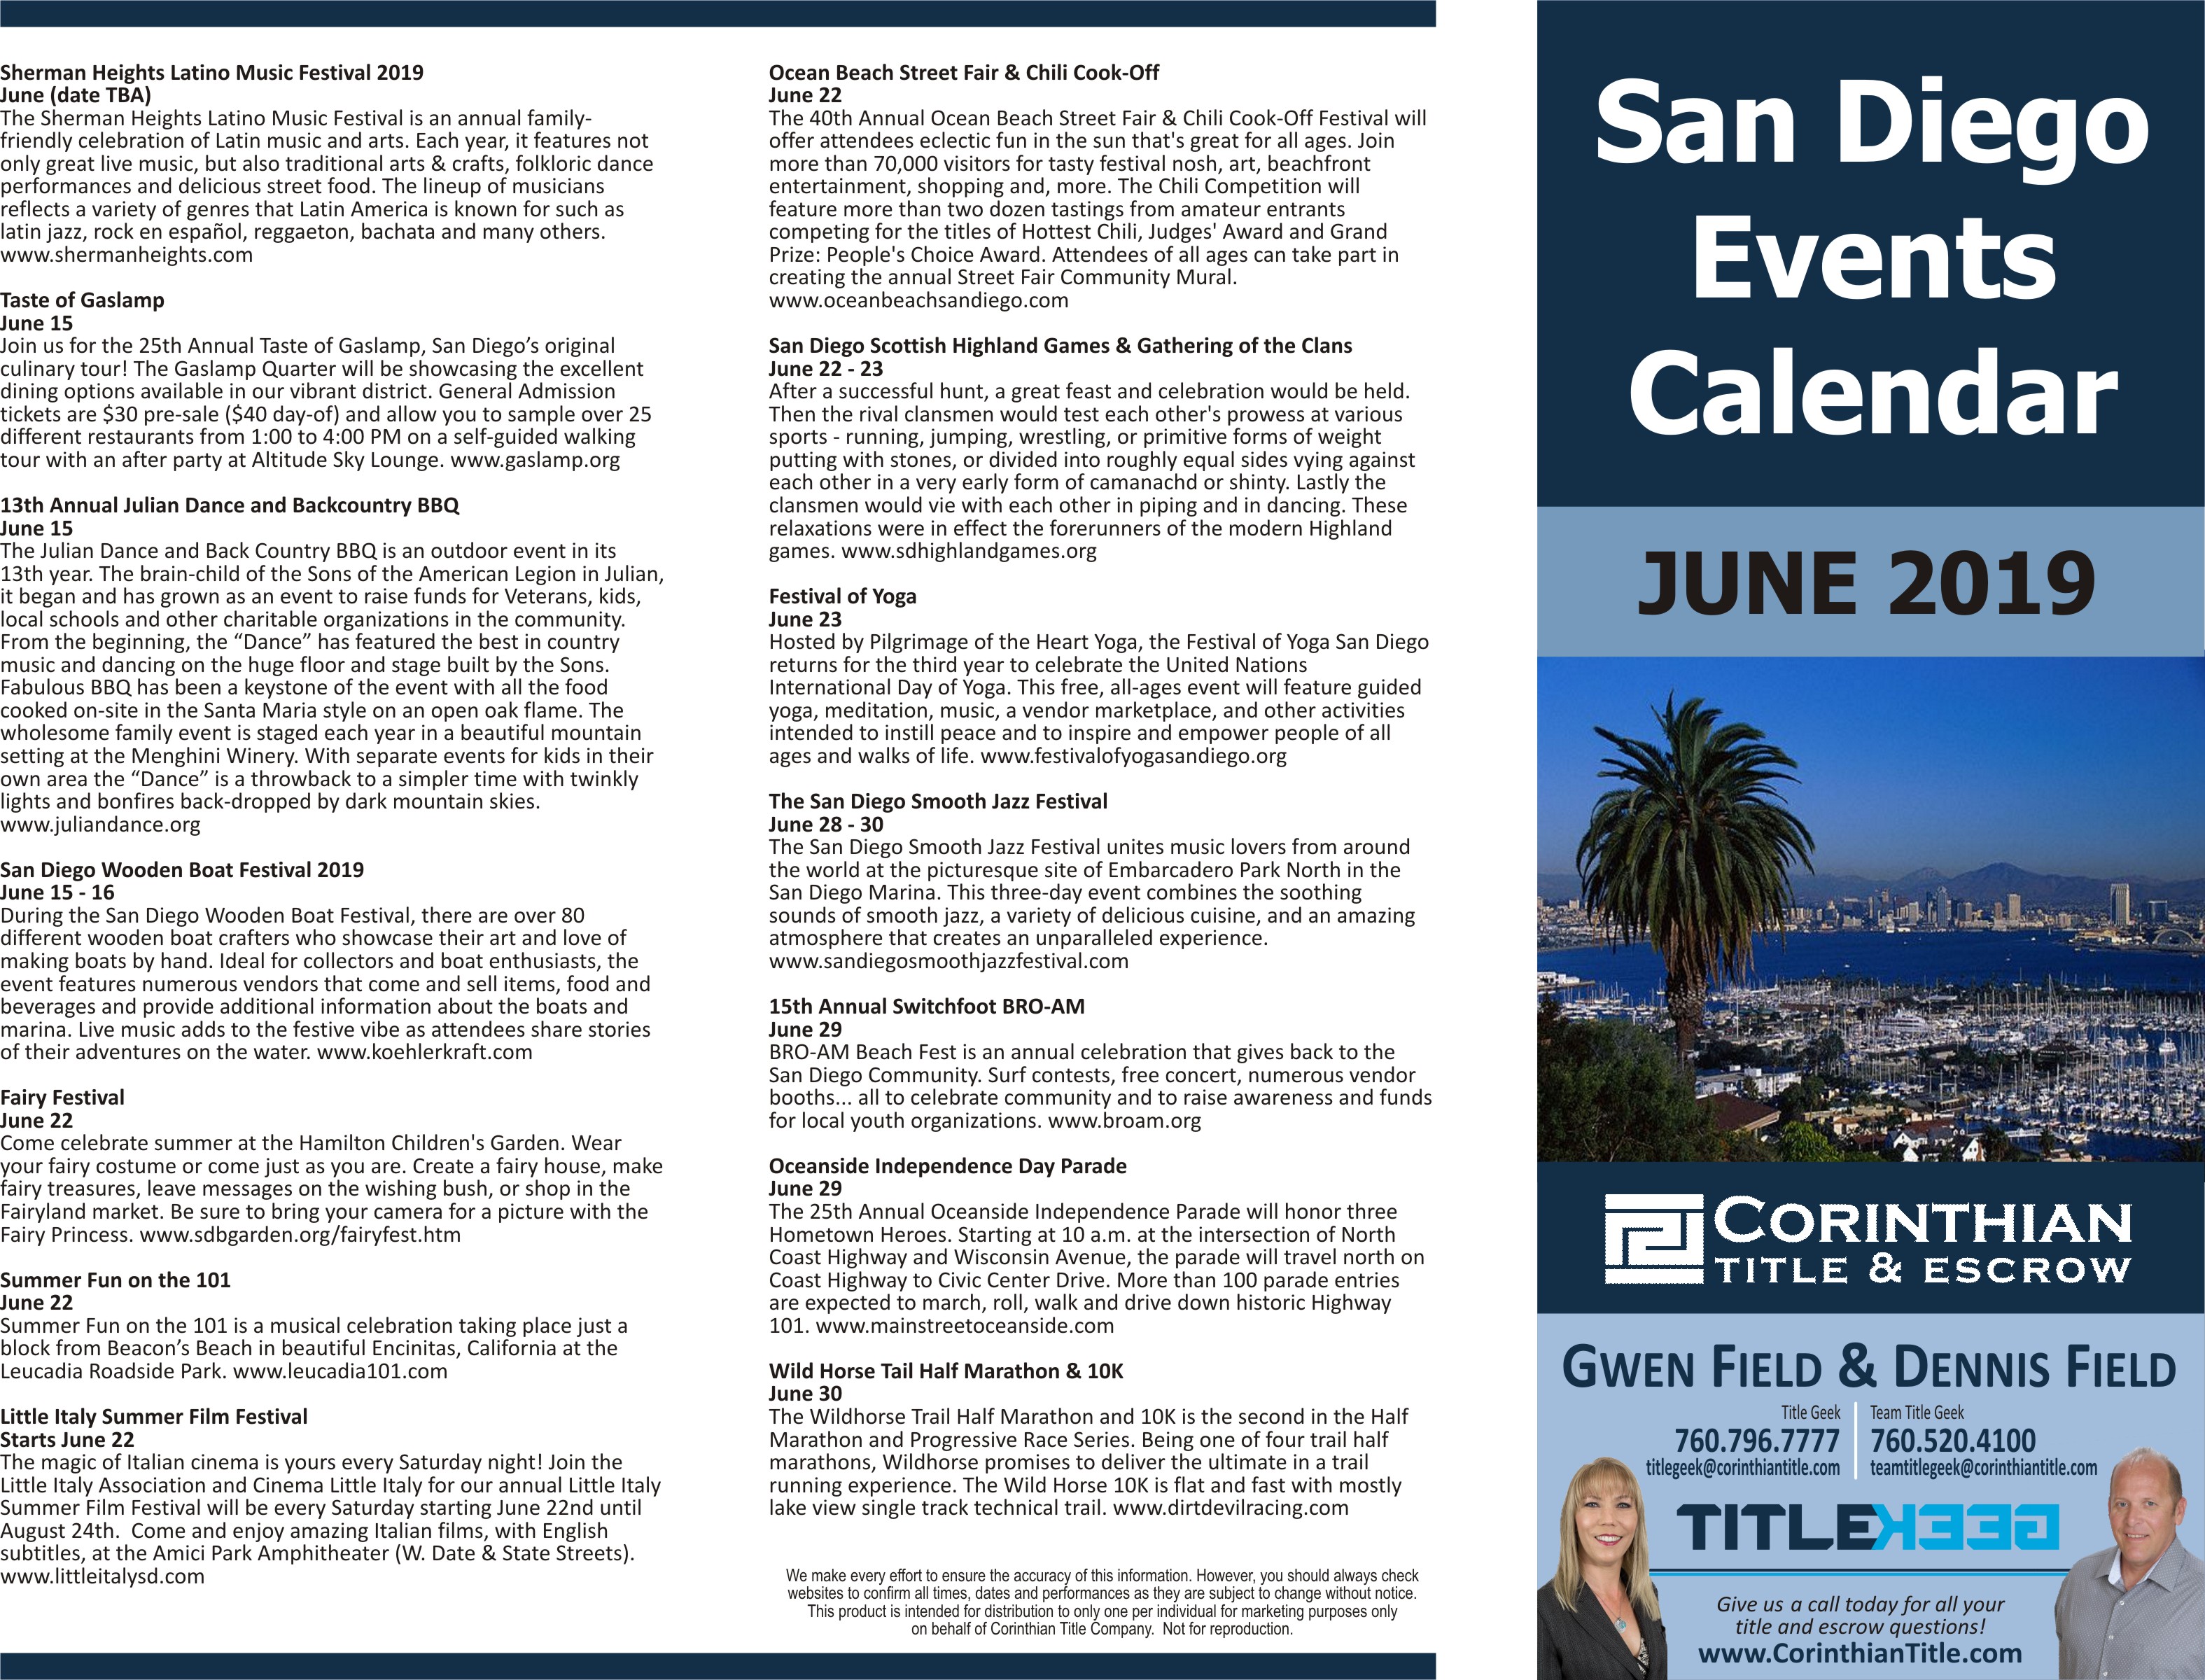 June 2019 San Diego County Calendar of Events - North County San Diego